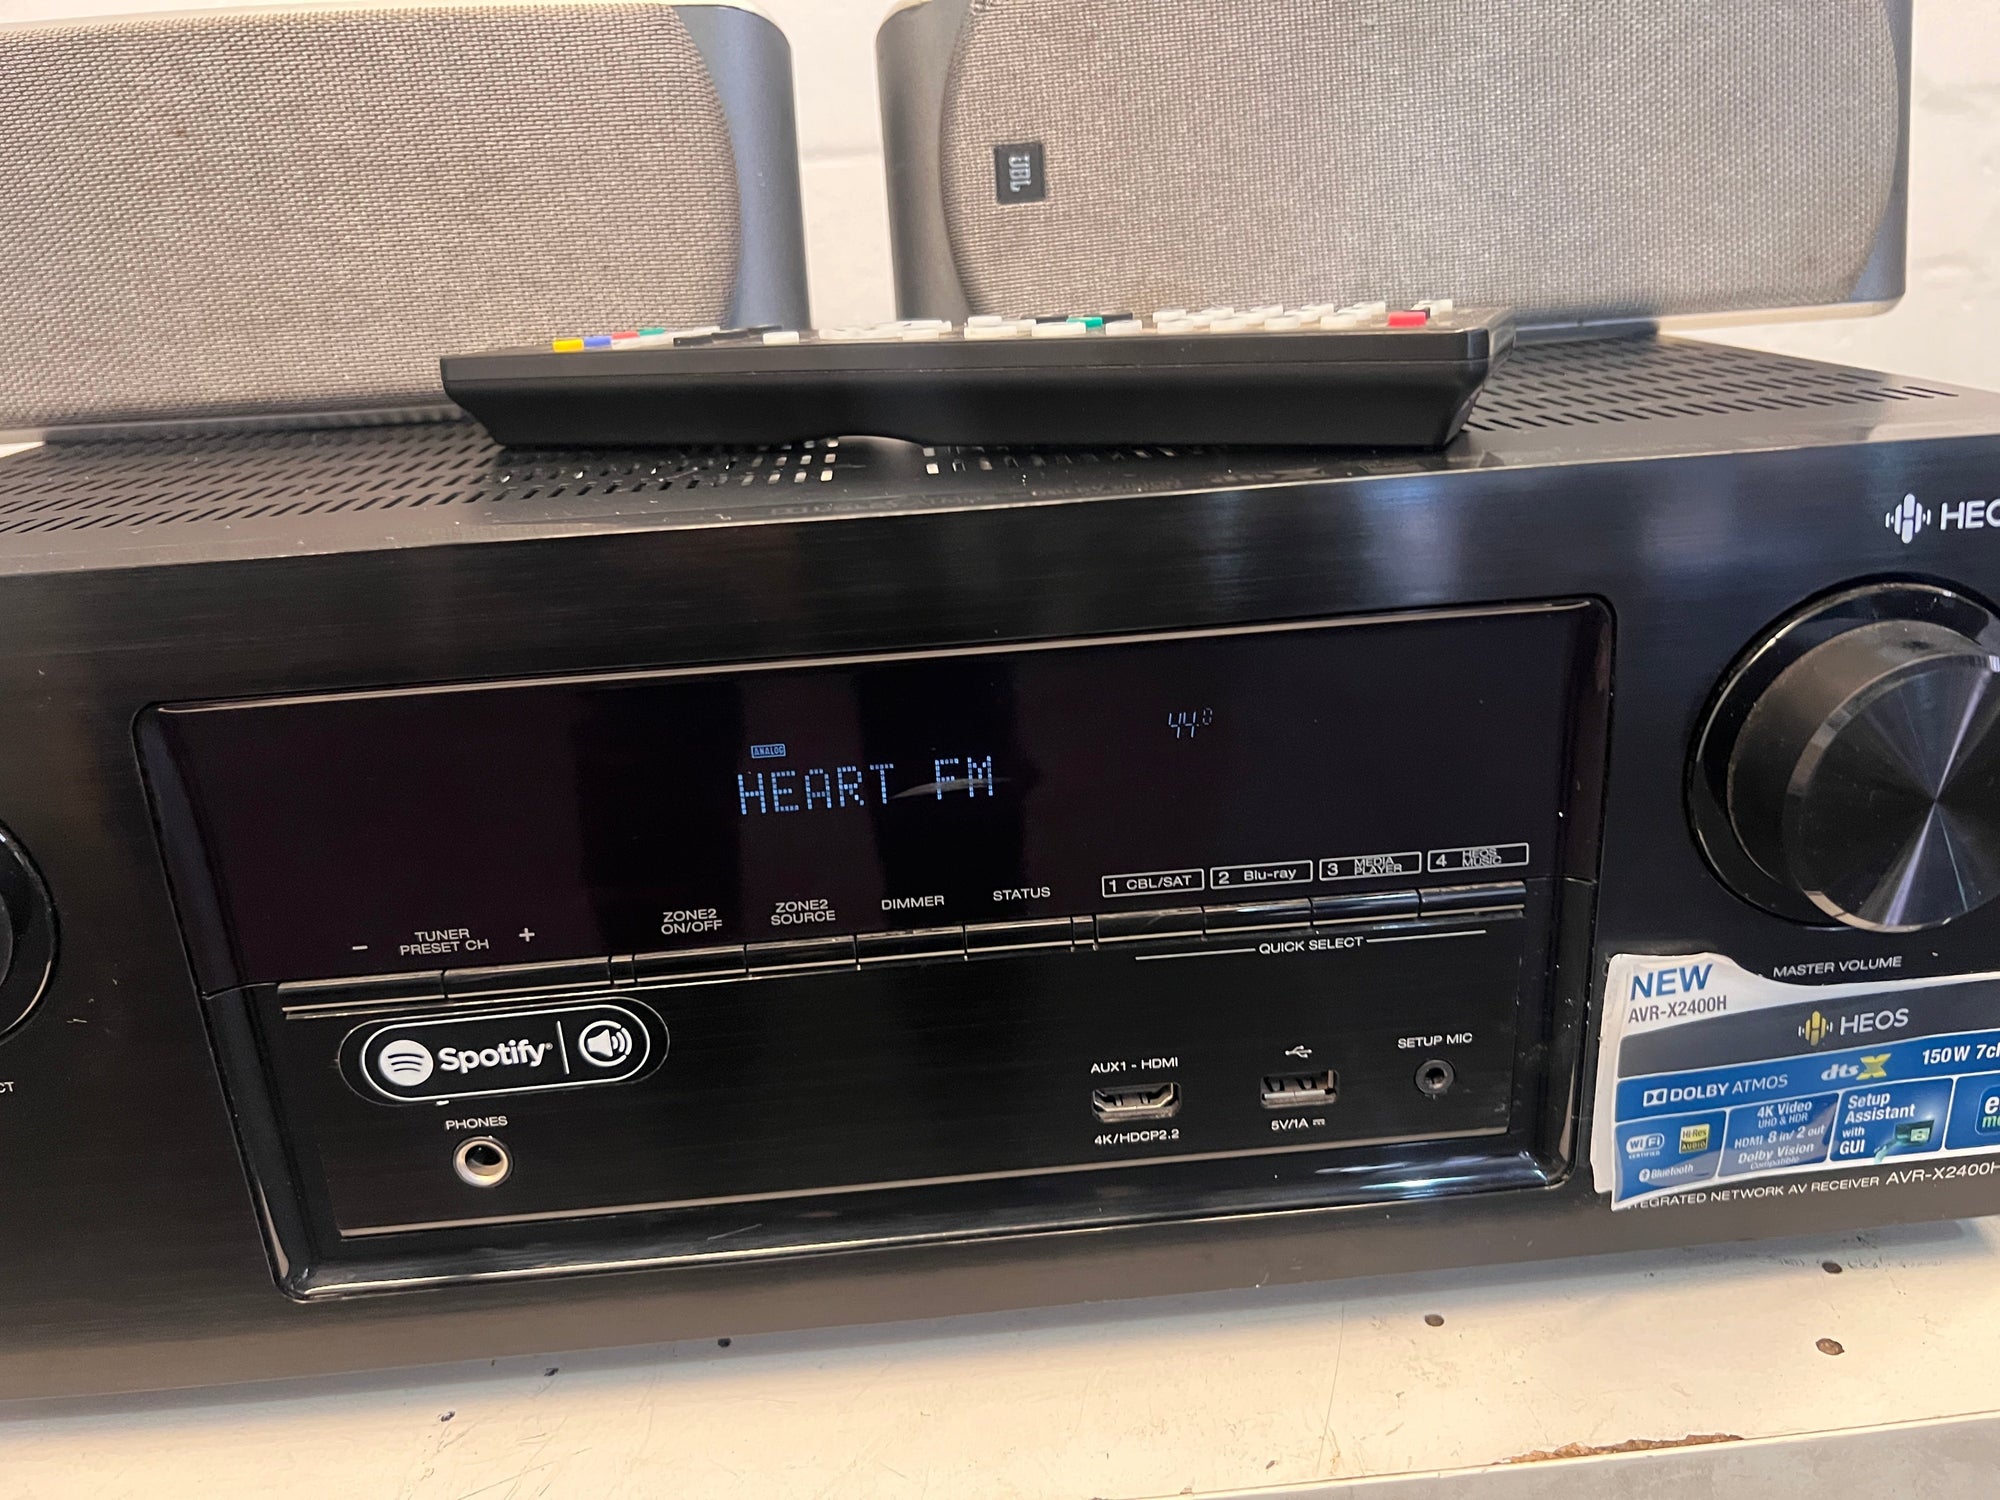 Denon AVR-X2400H IN-Command 7.2-channel home theater receiver with Wi-Fi®, Dolby Atmos®, Apple® AirPlay® 2, and HEOS